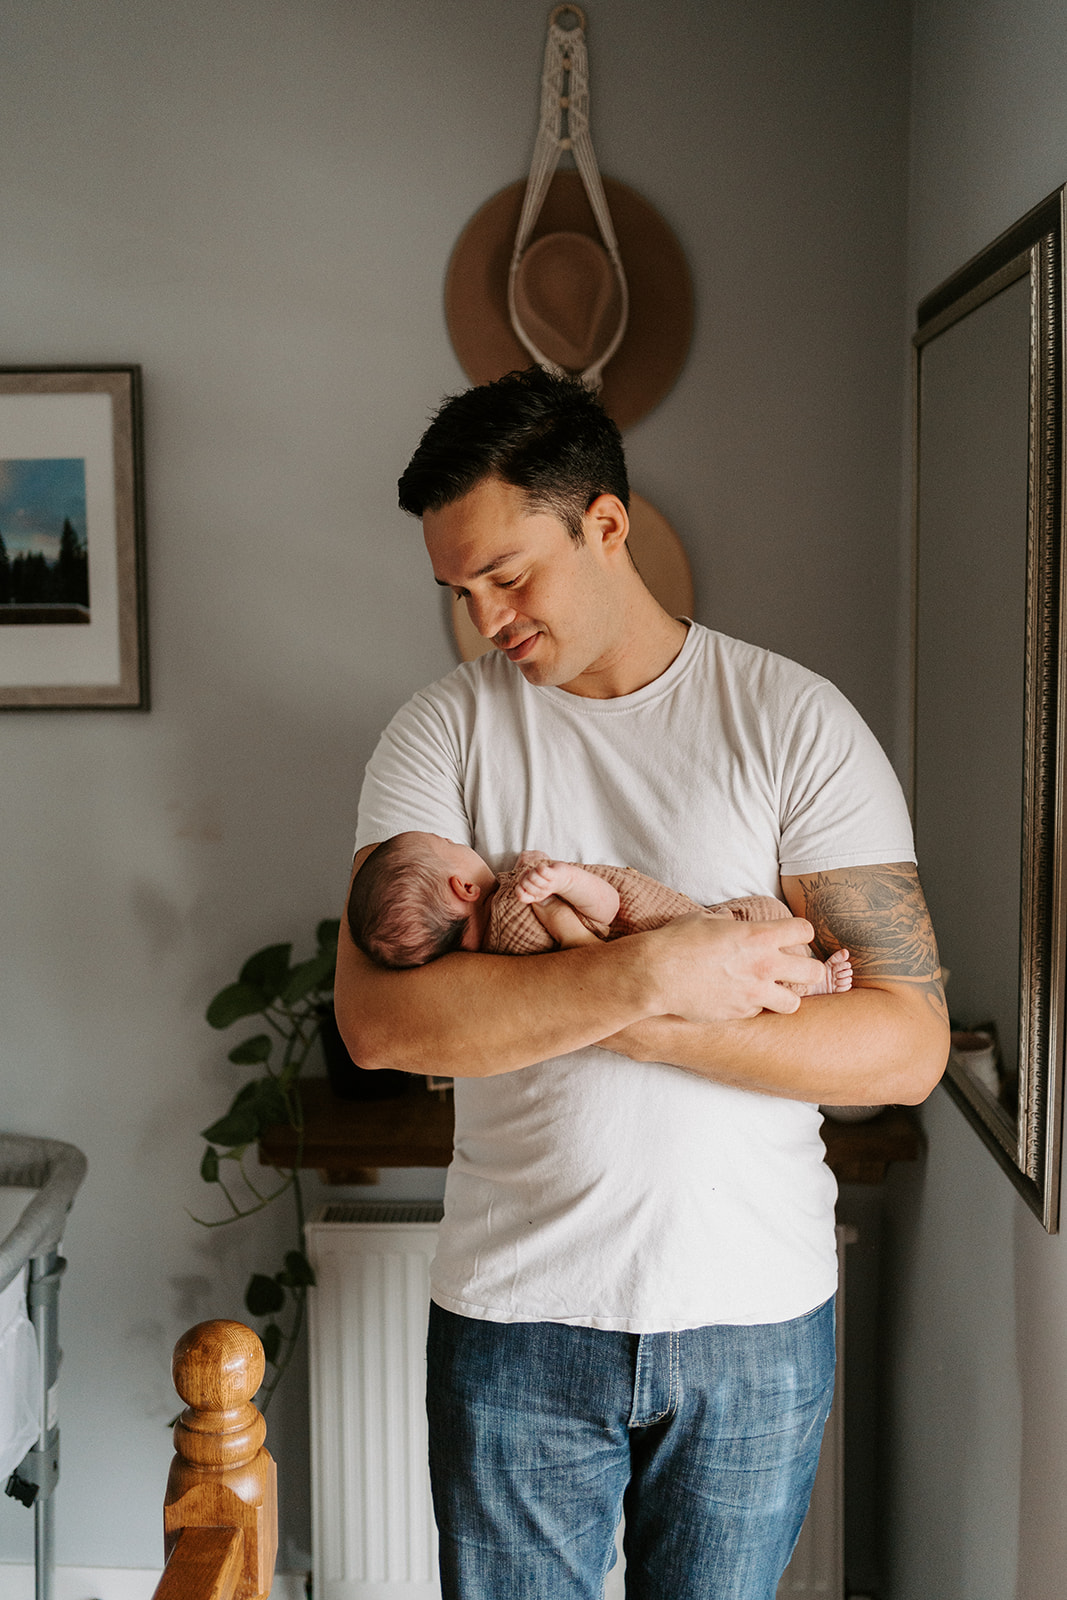 Father standing up holding newborn in arms while looking down at them